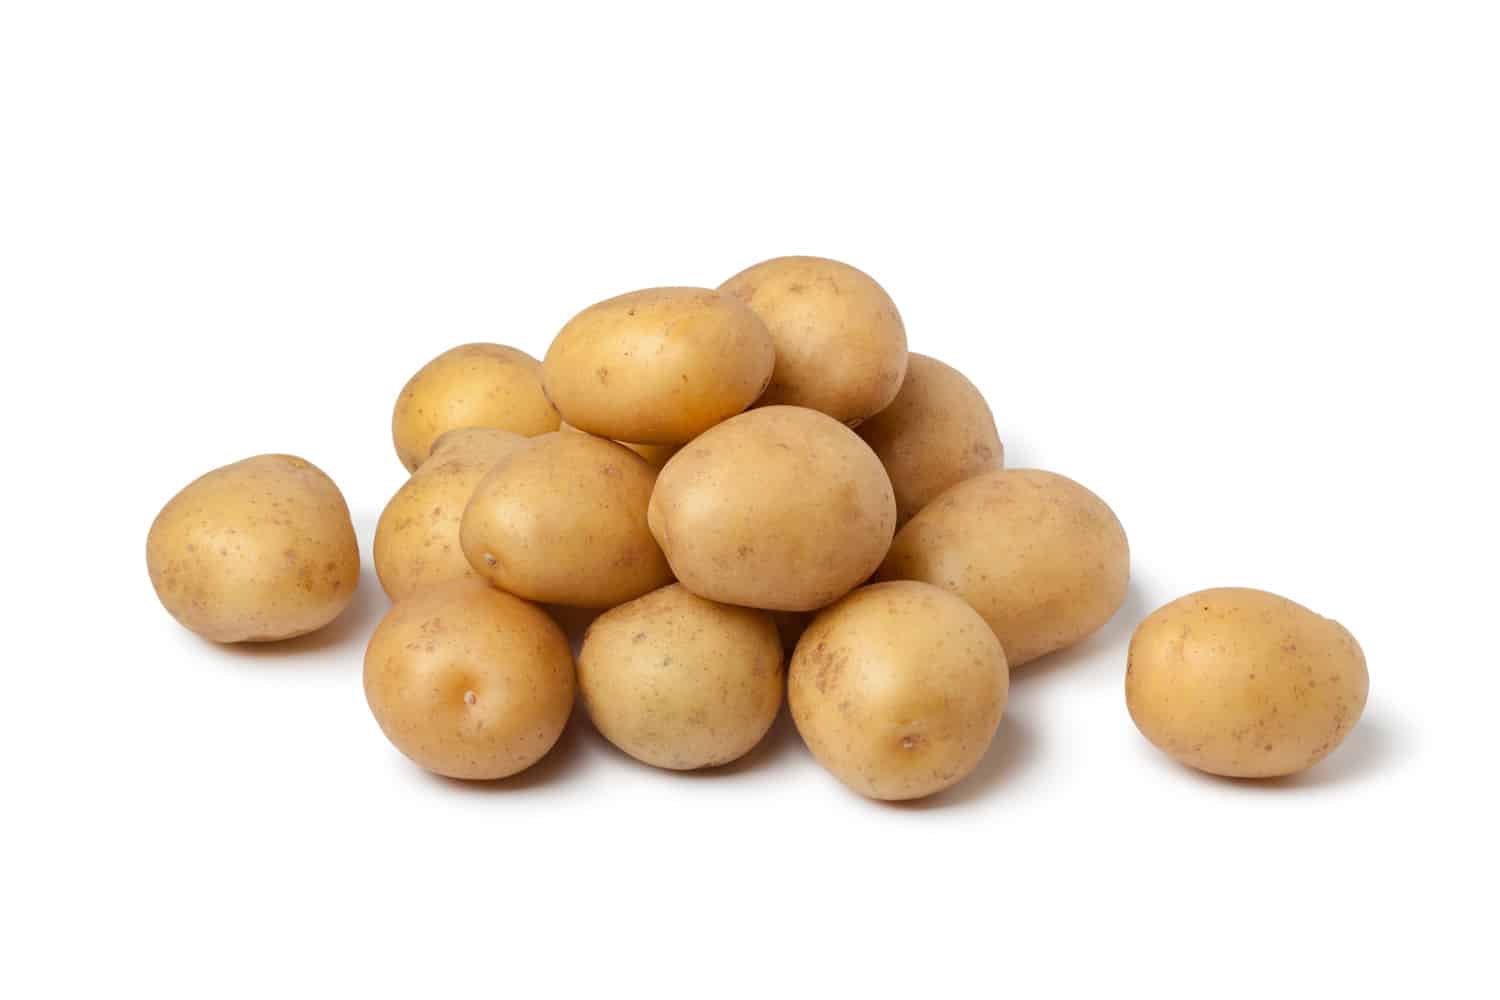 Small new potatoes on white background